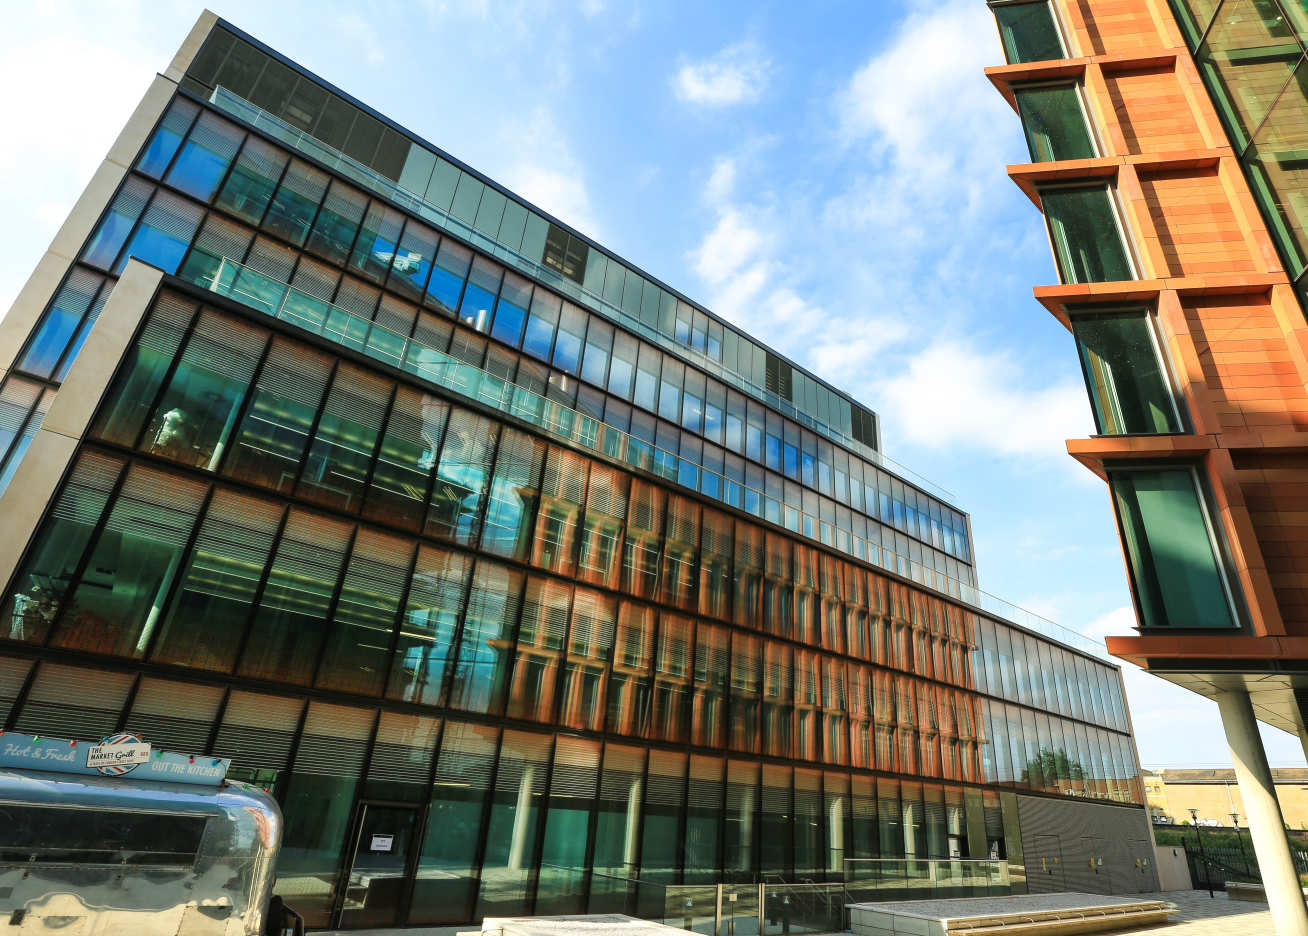 The exterior of the Molecular Sciences Research Hub building at White City